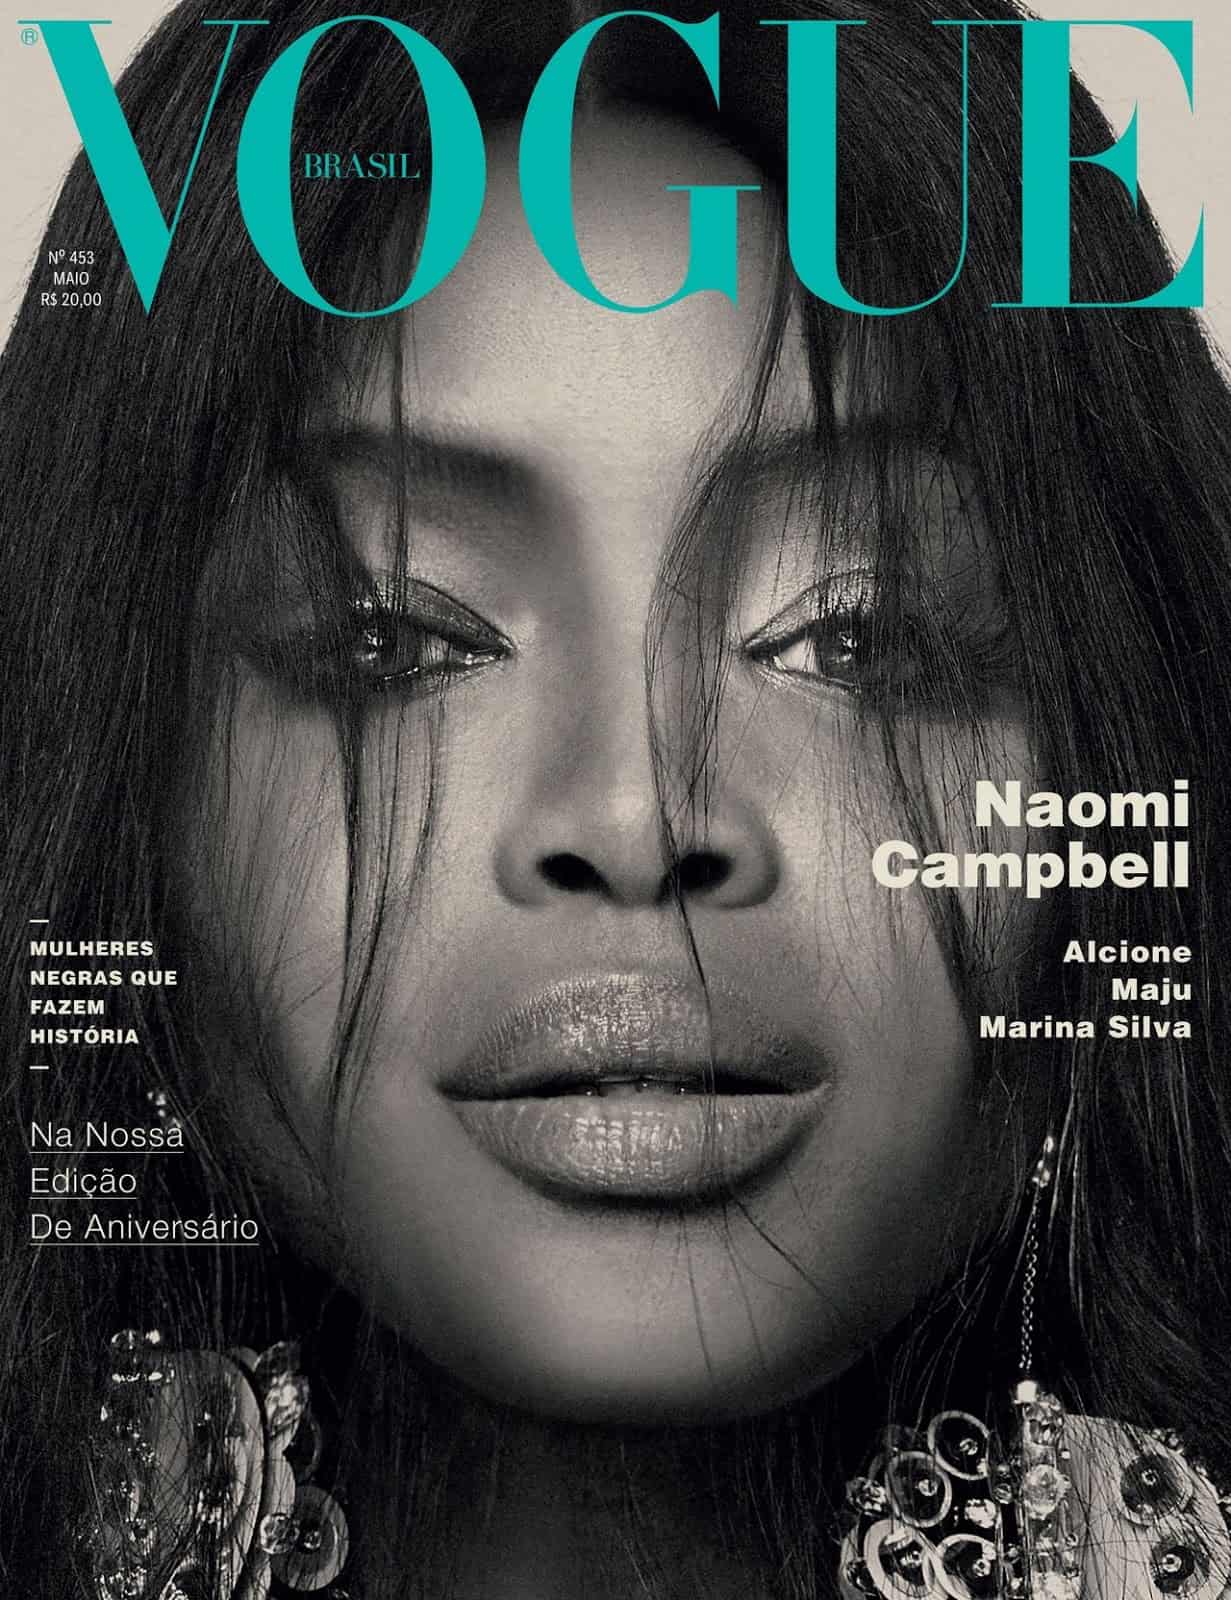 Naomi Campbell calls on Vogue to launch African Edition